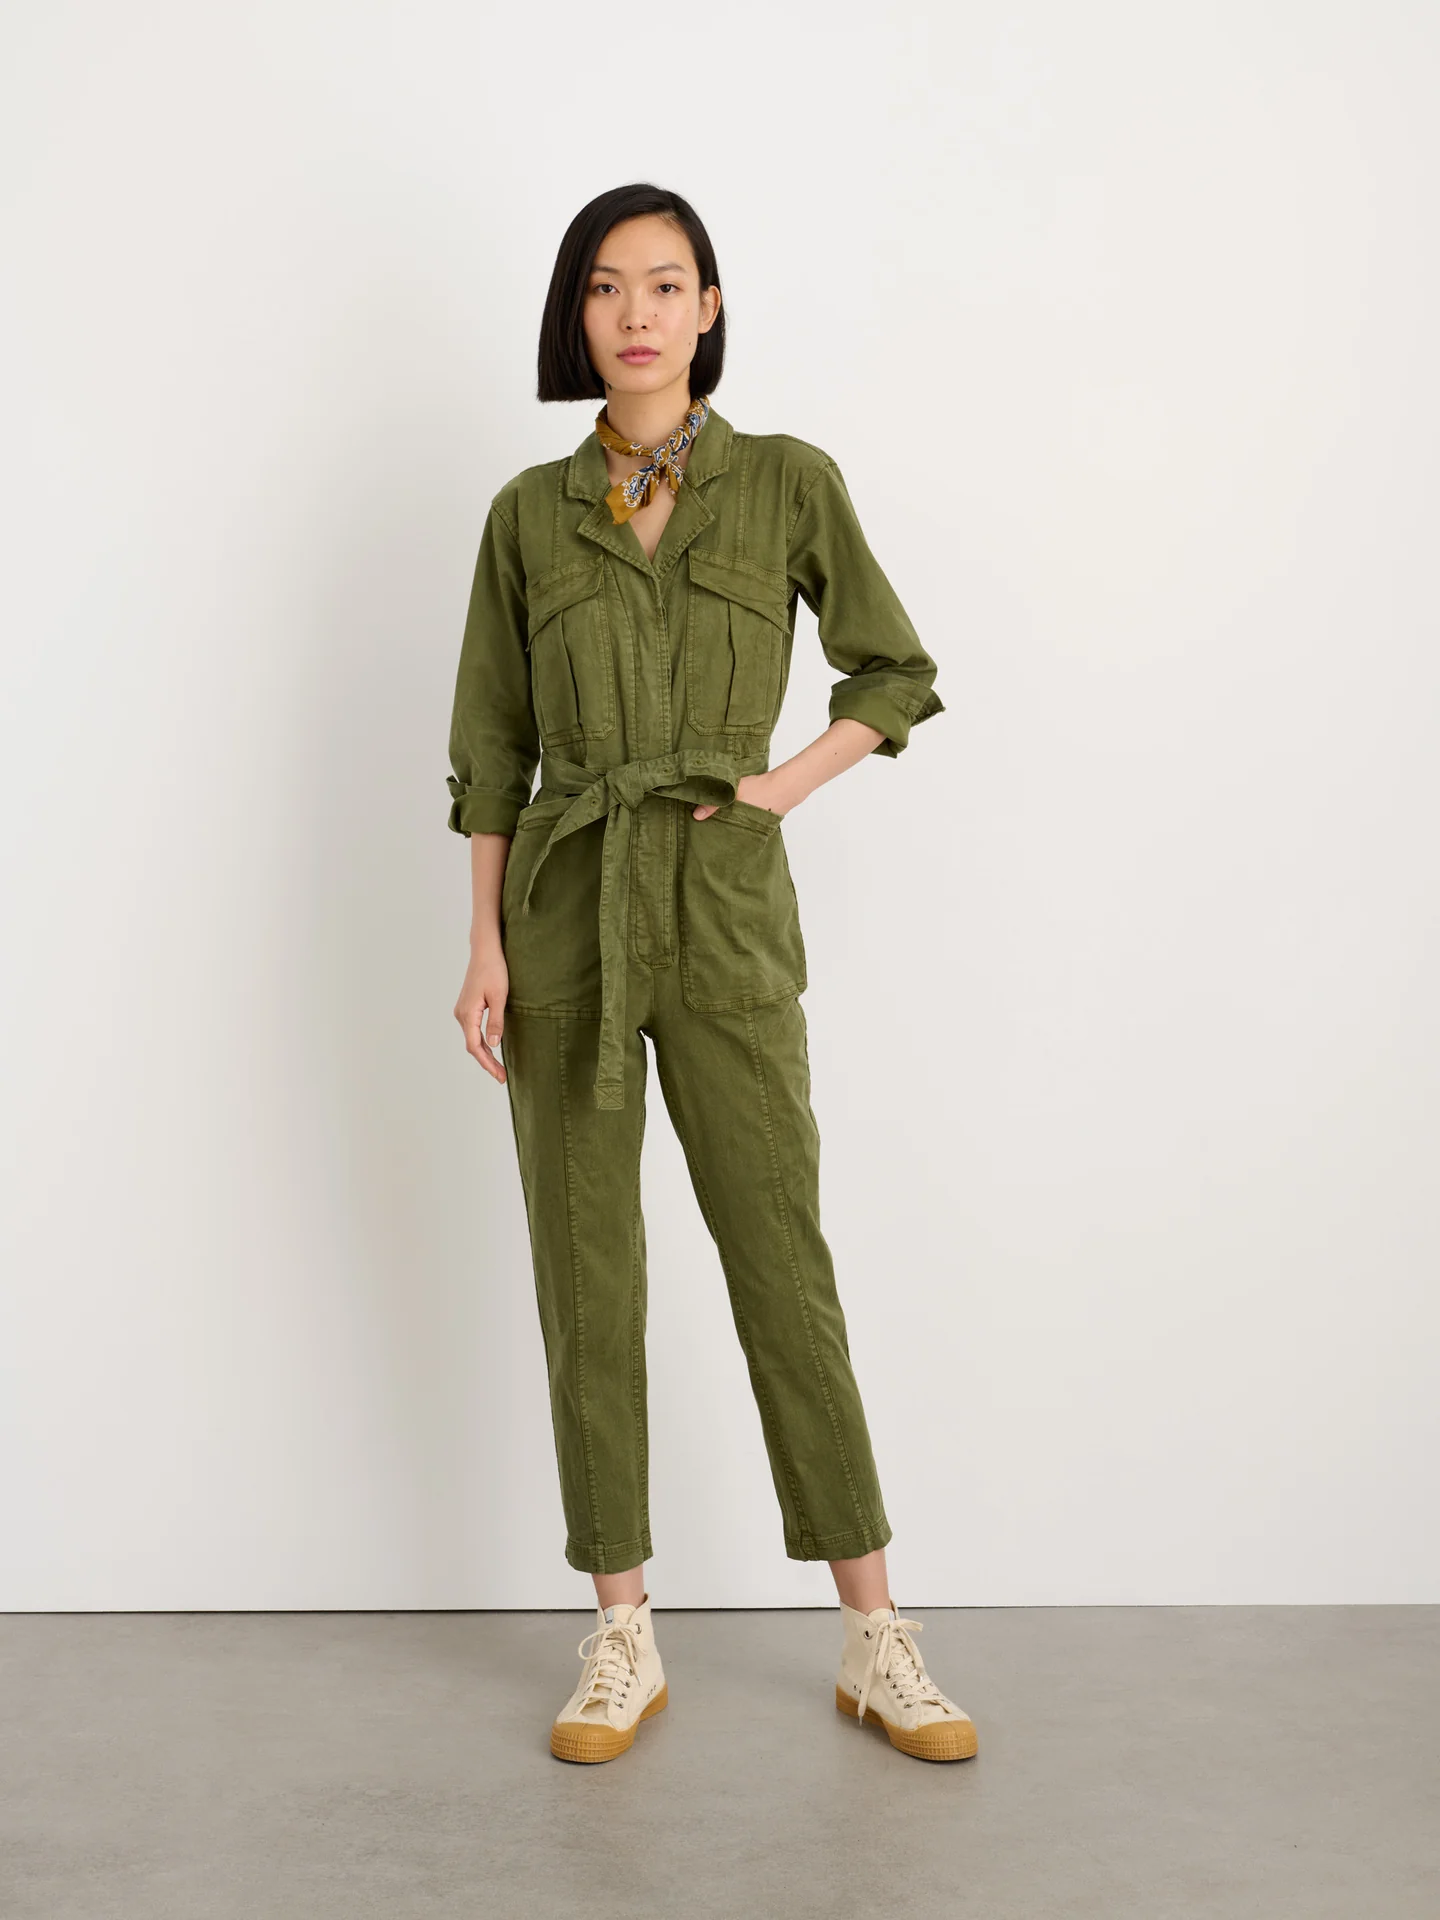 Alex Mill + Expedition Jumpsuit in Washed Twill